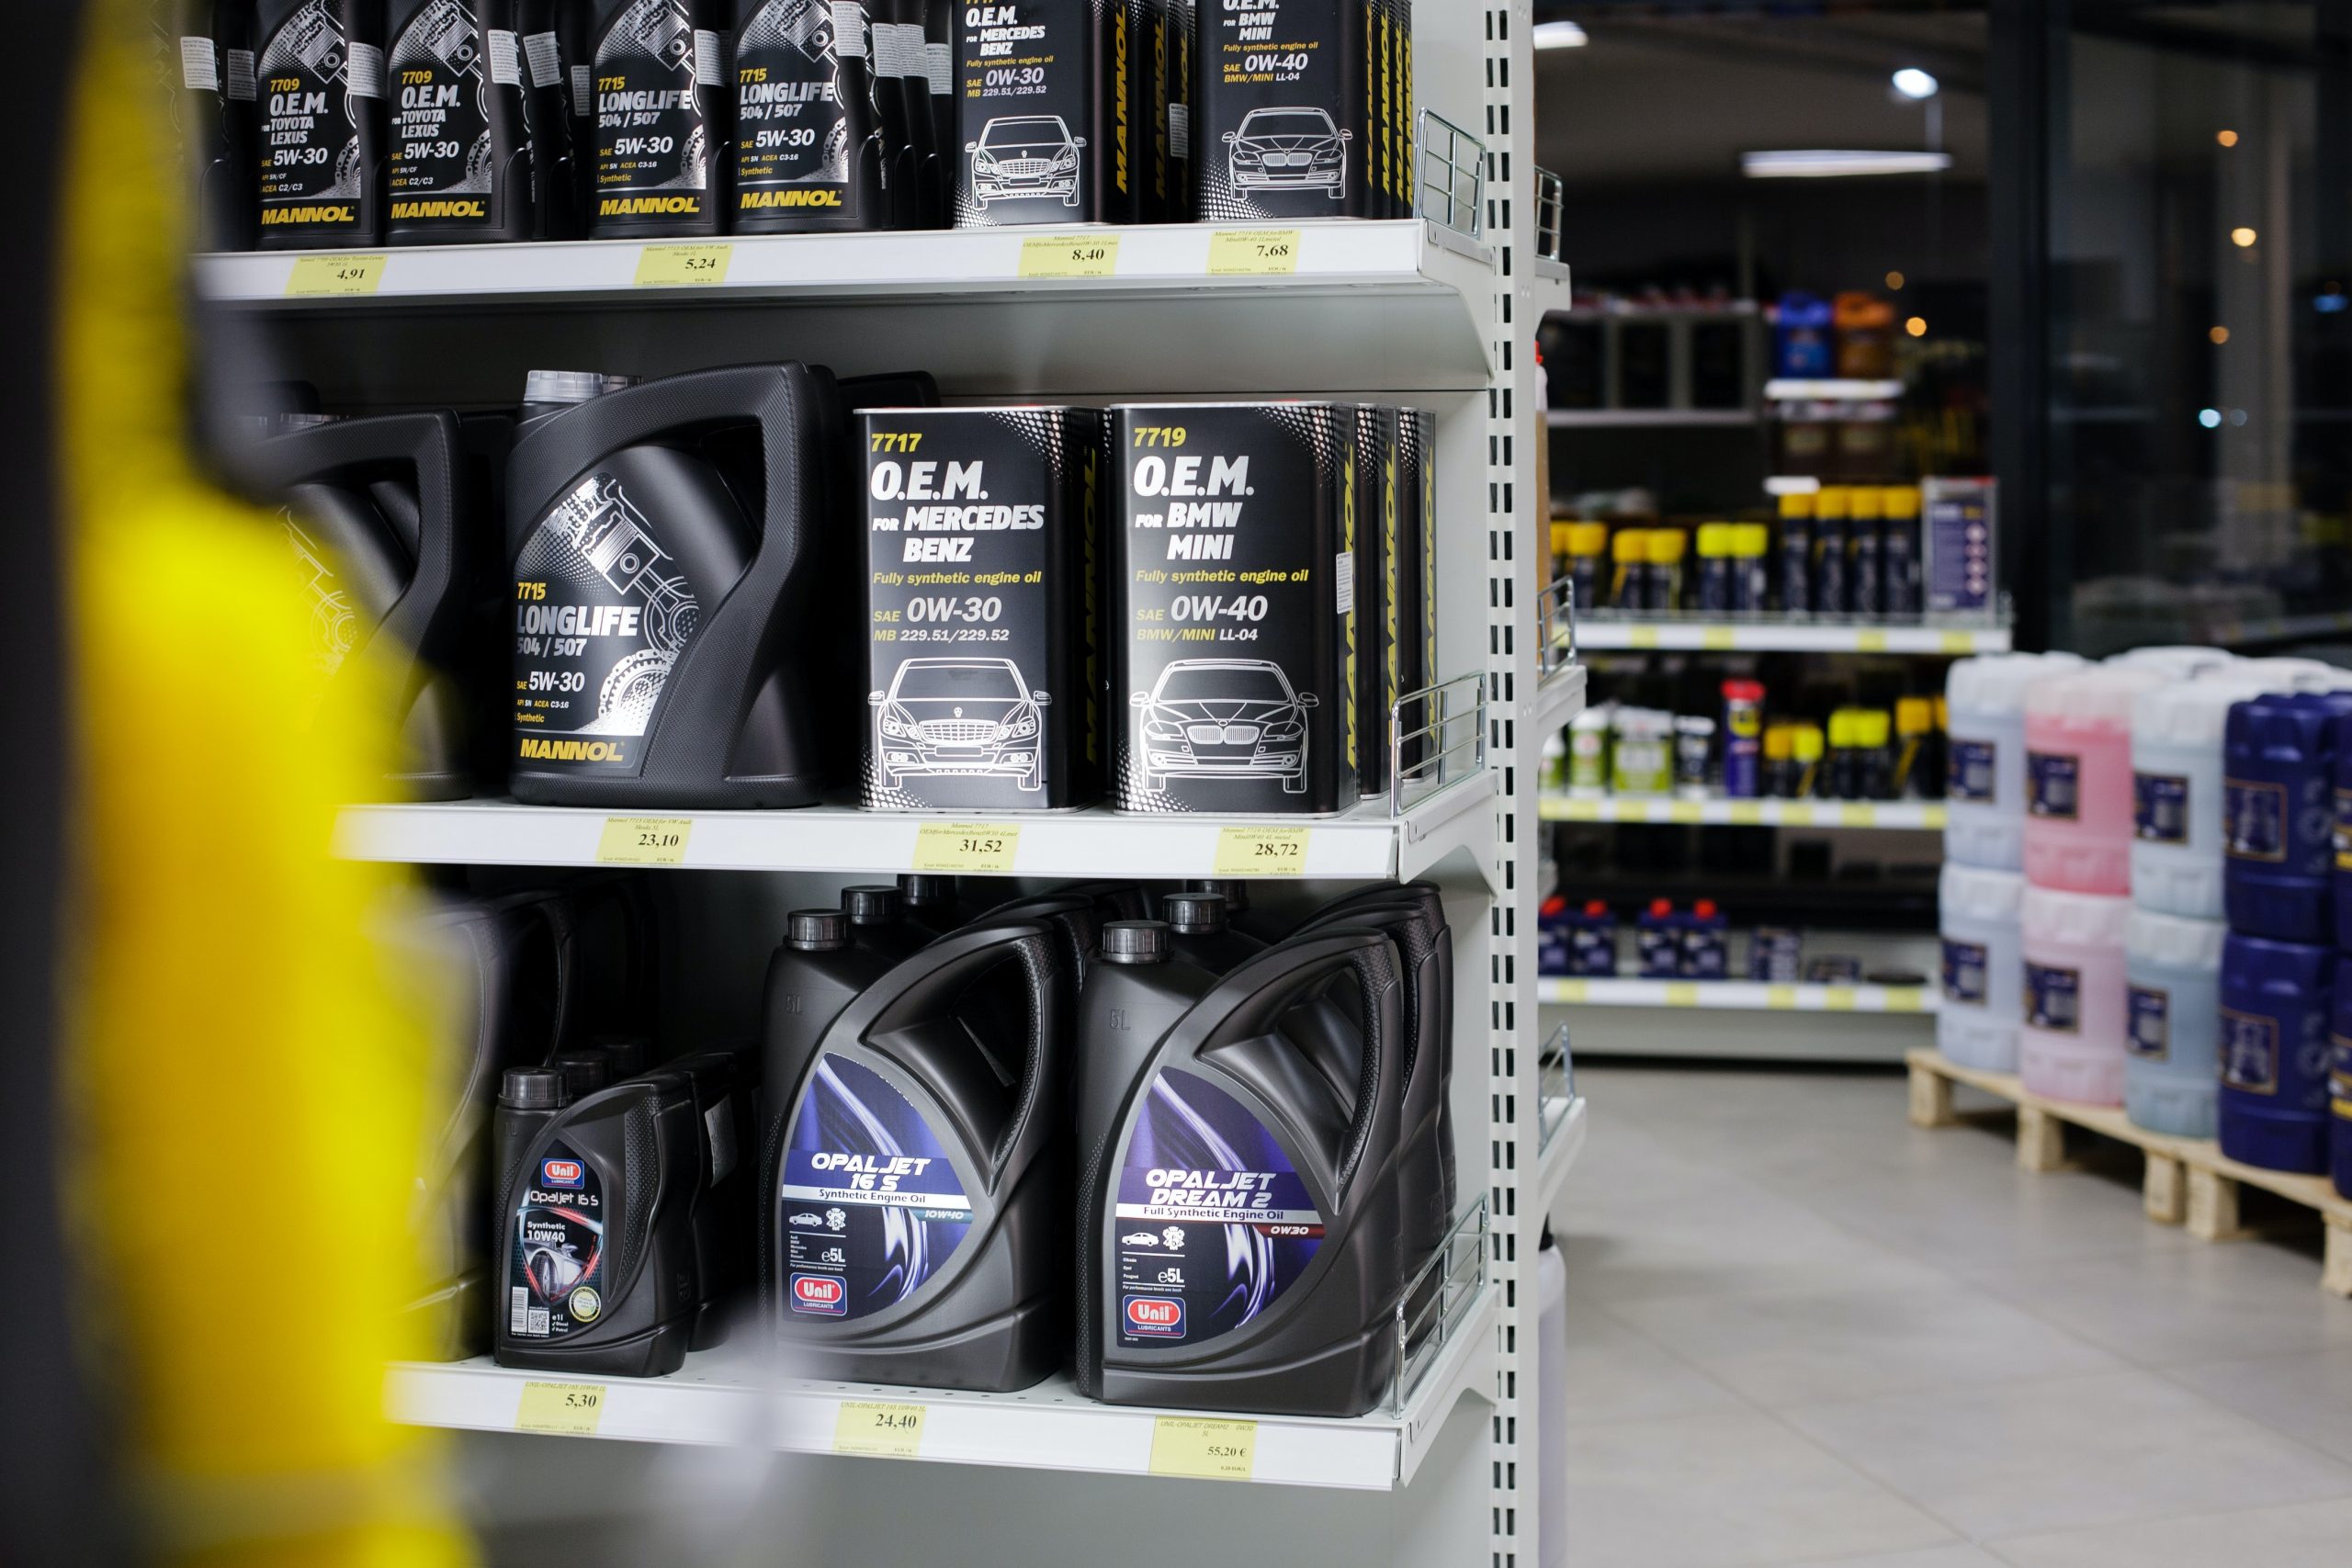 car servicing products